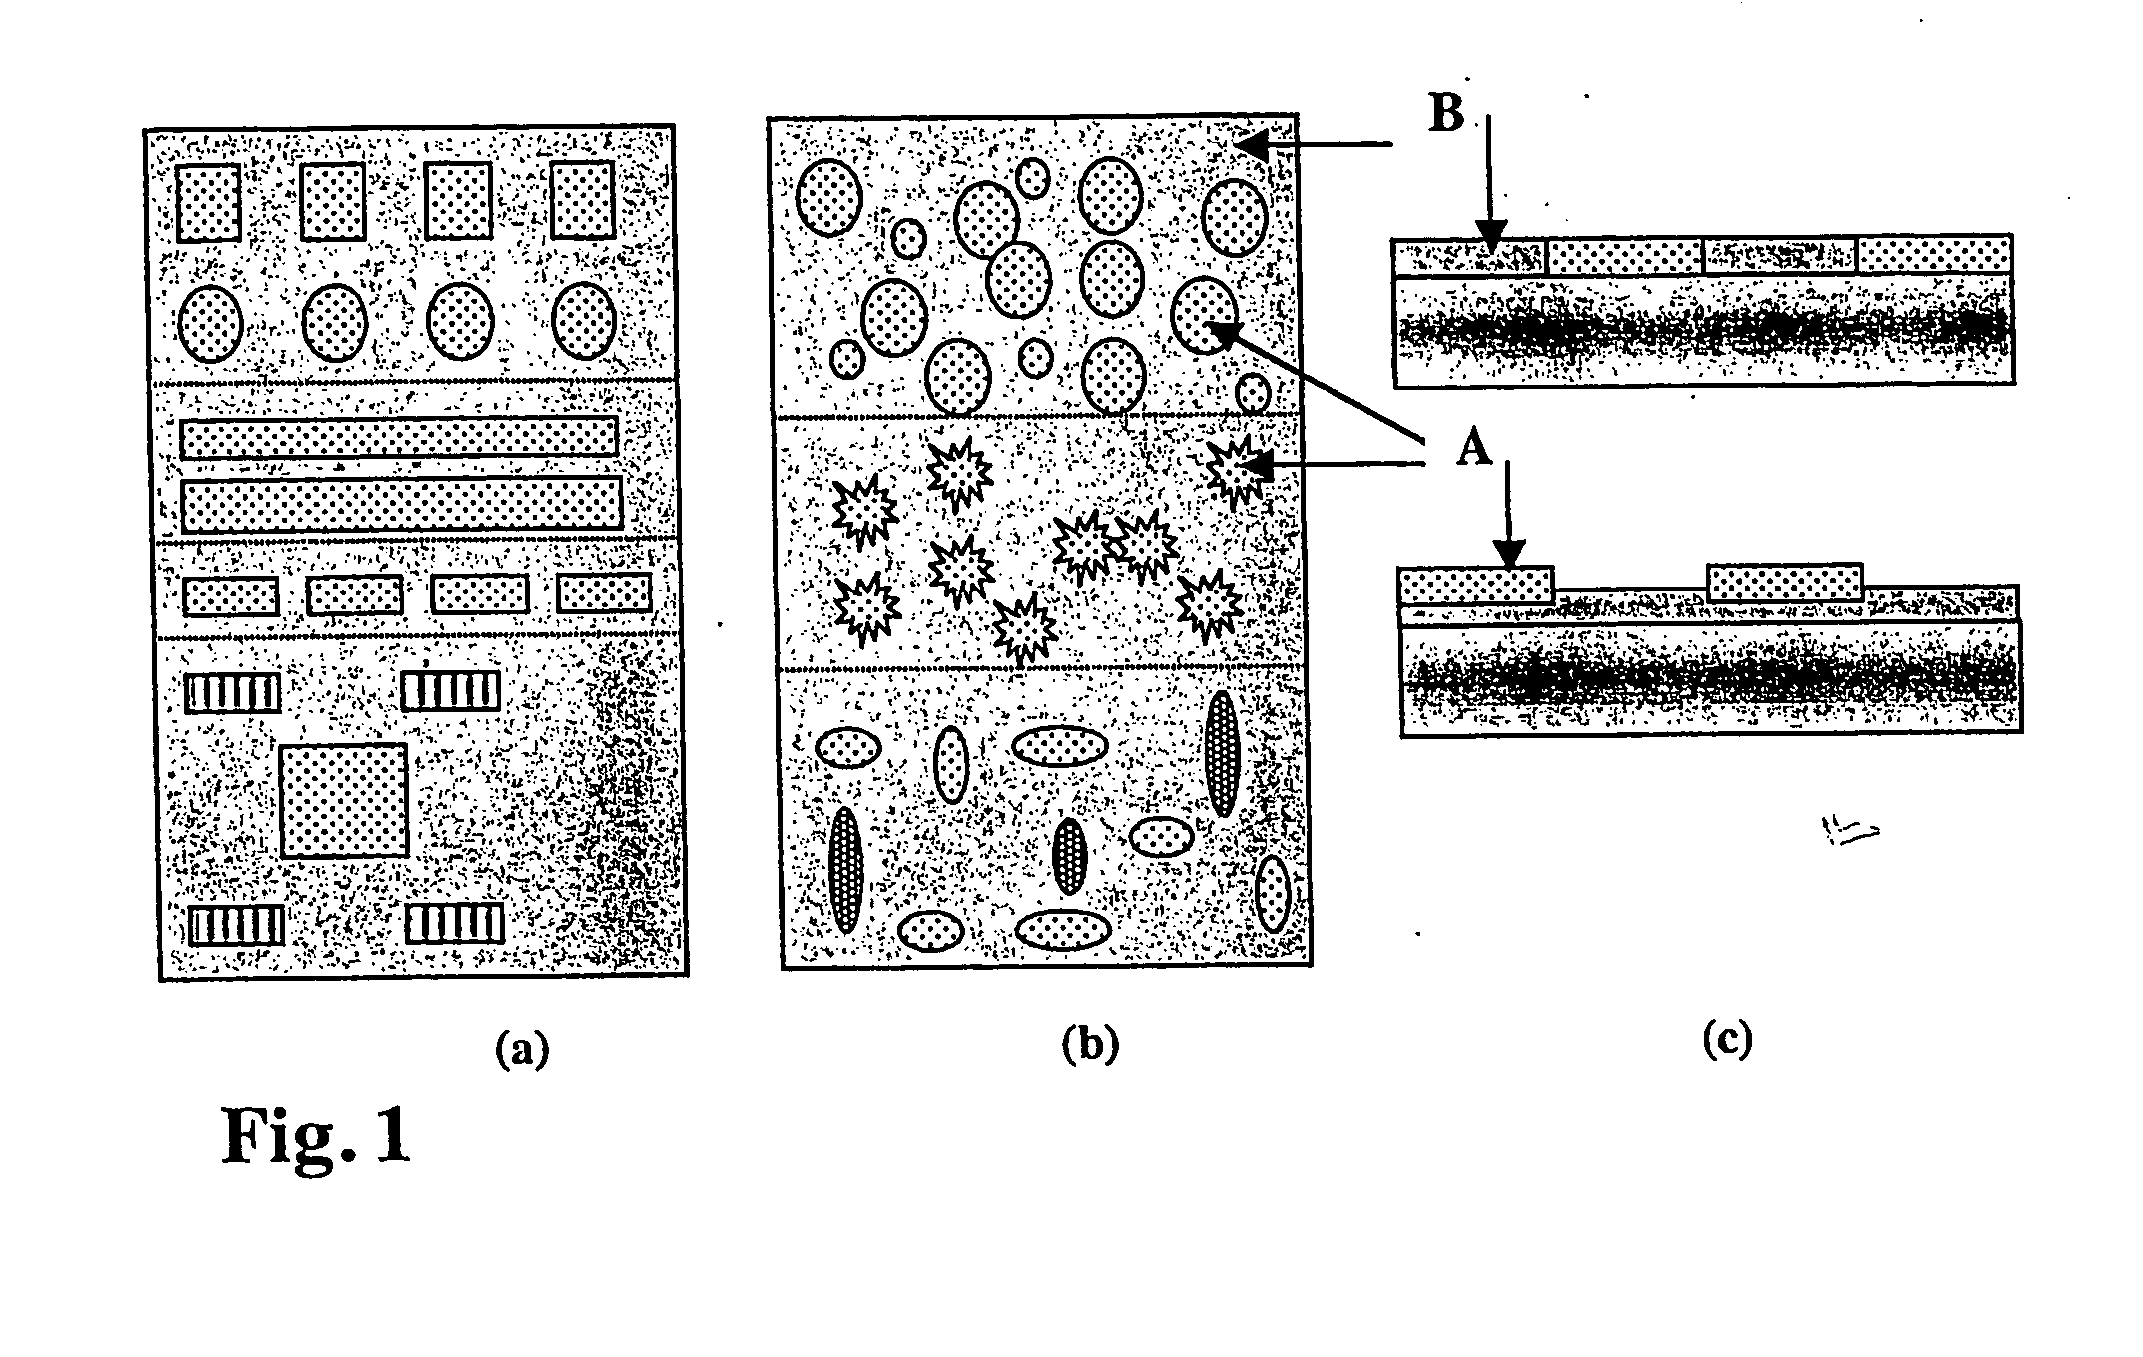 Device with chemical surface patterns